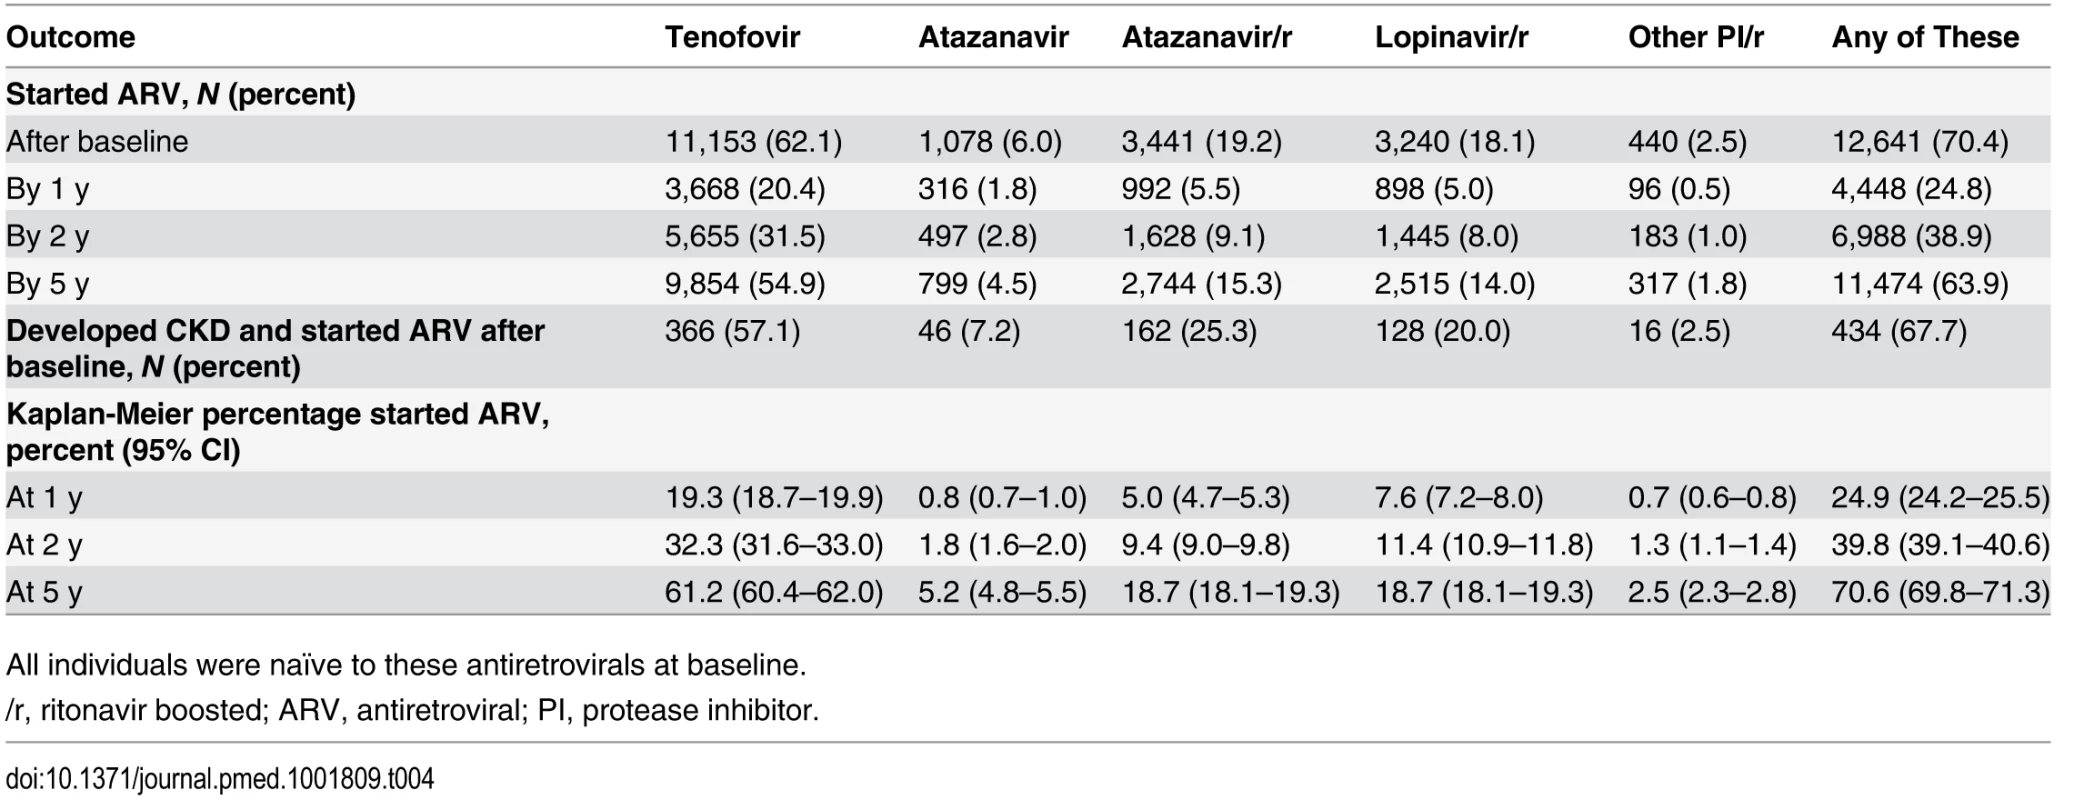 Use of potentially nephrotoxic antiretrovirals during follow-up in among 17,954 individuals in the D:A:D study.